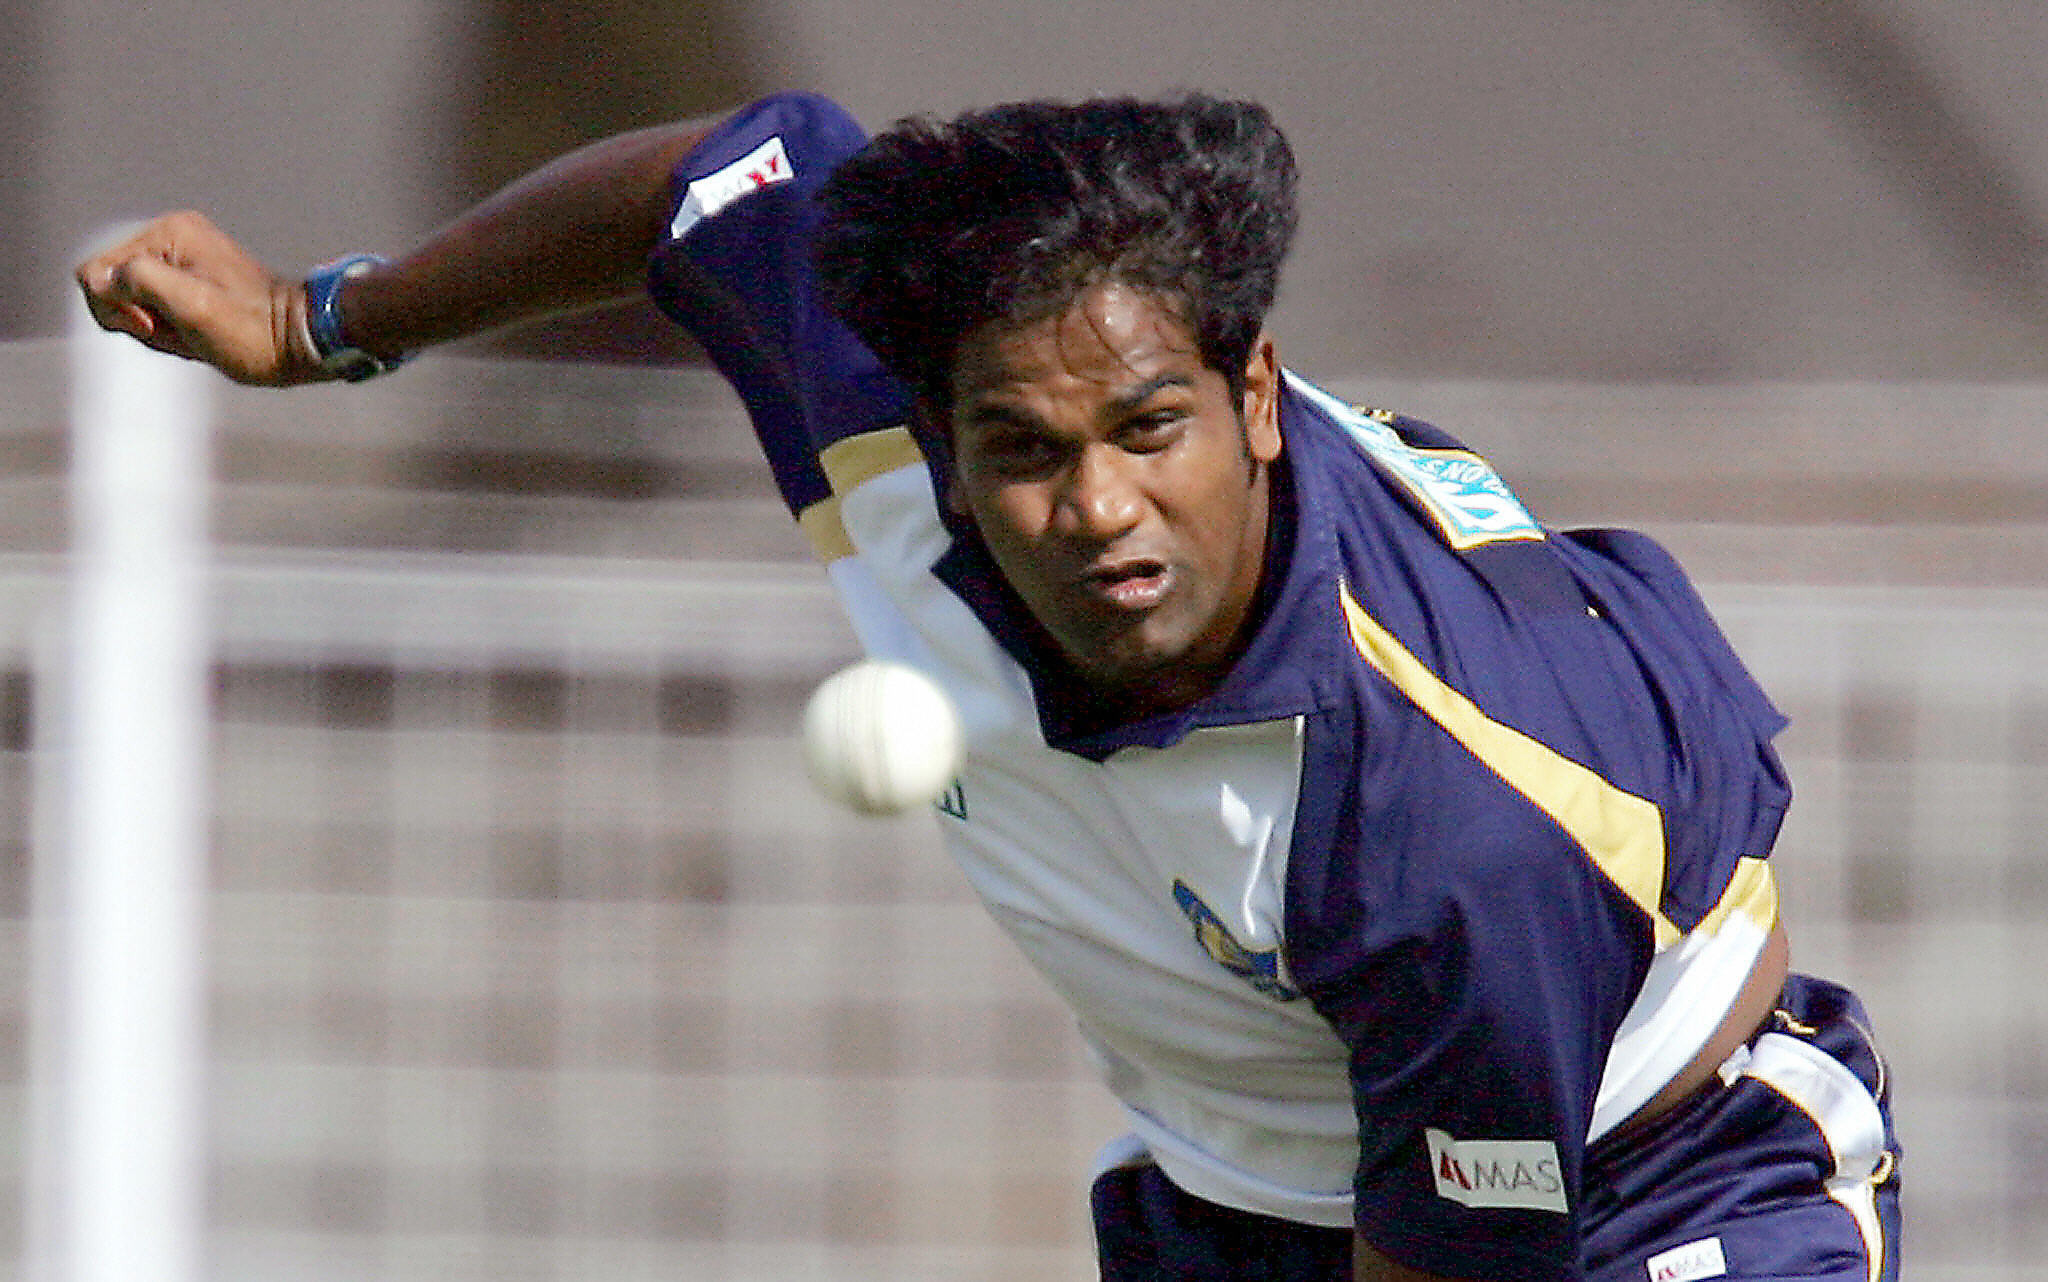 Former bowler and coach Nuwan Zoysa has been hit with an additional match-fixing charge ©Getty Images